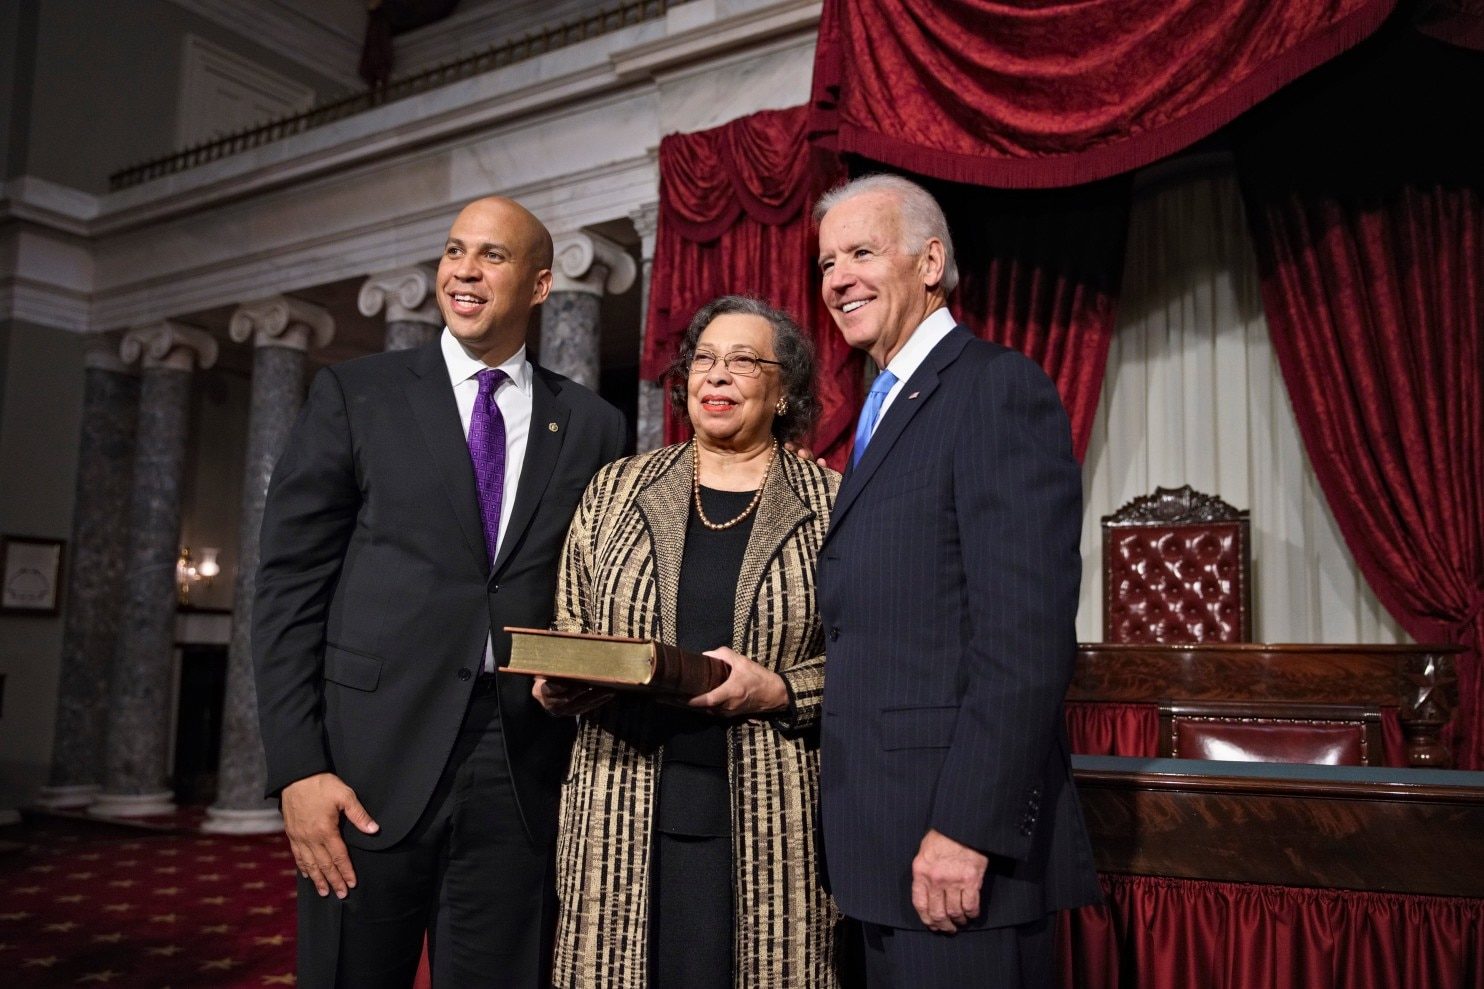 Sen. Cory Booker (D-N.J.), left, poses with his mother, Carolyn Booker, and then-Vice President Biden at a Senate swearing-in ceremony at the Capitol on Oct. 31, 2013.